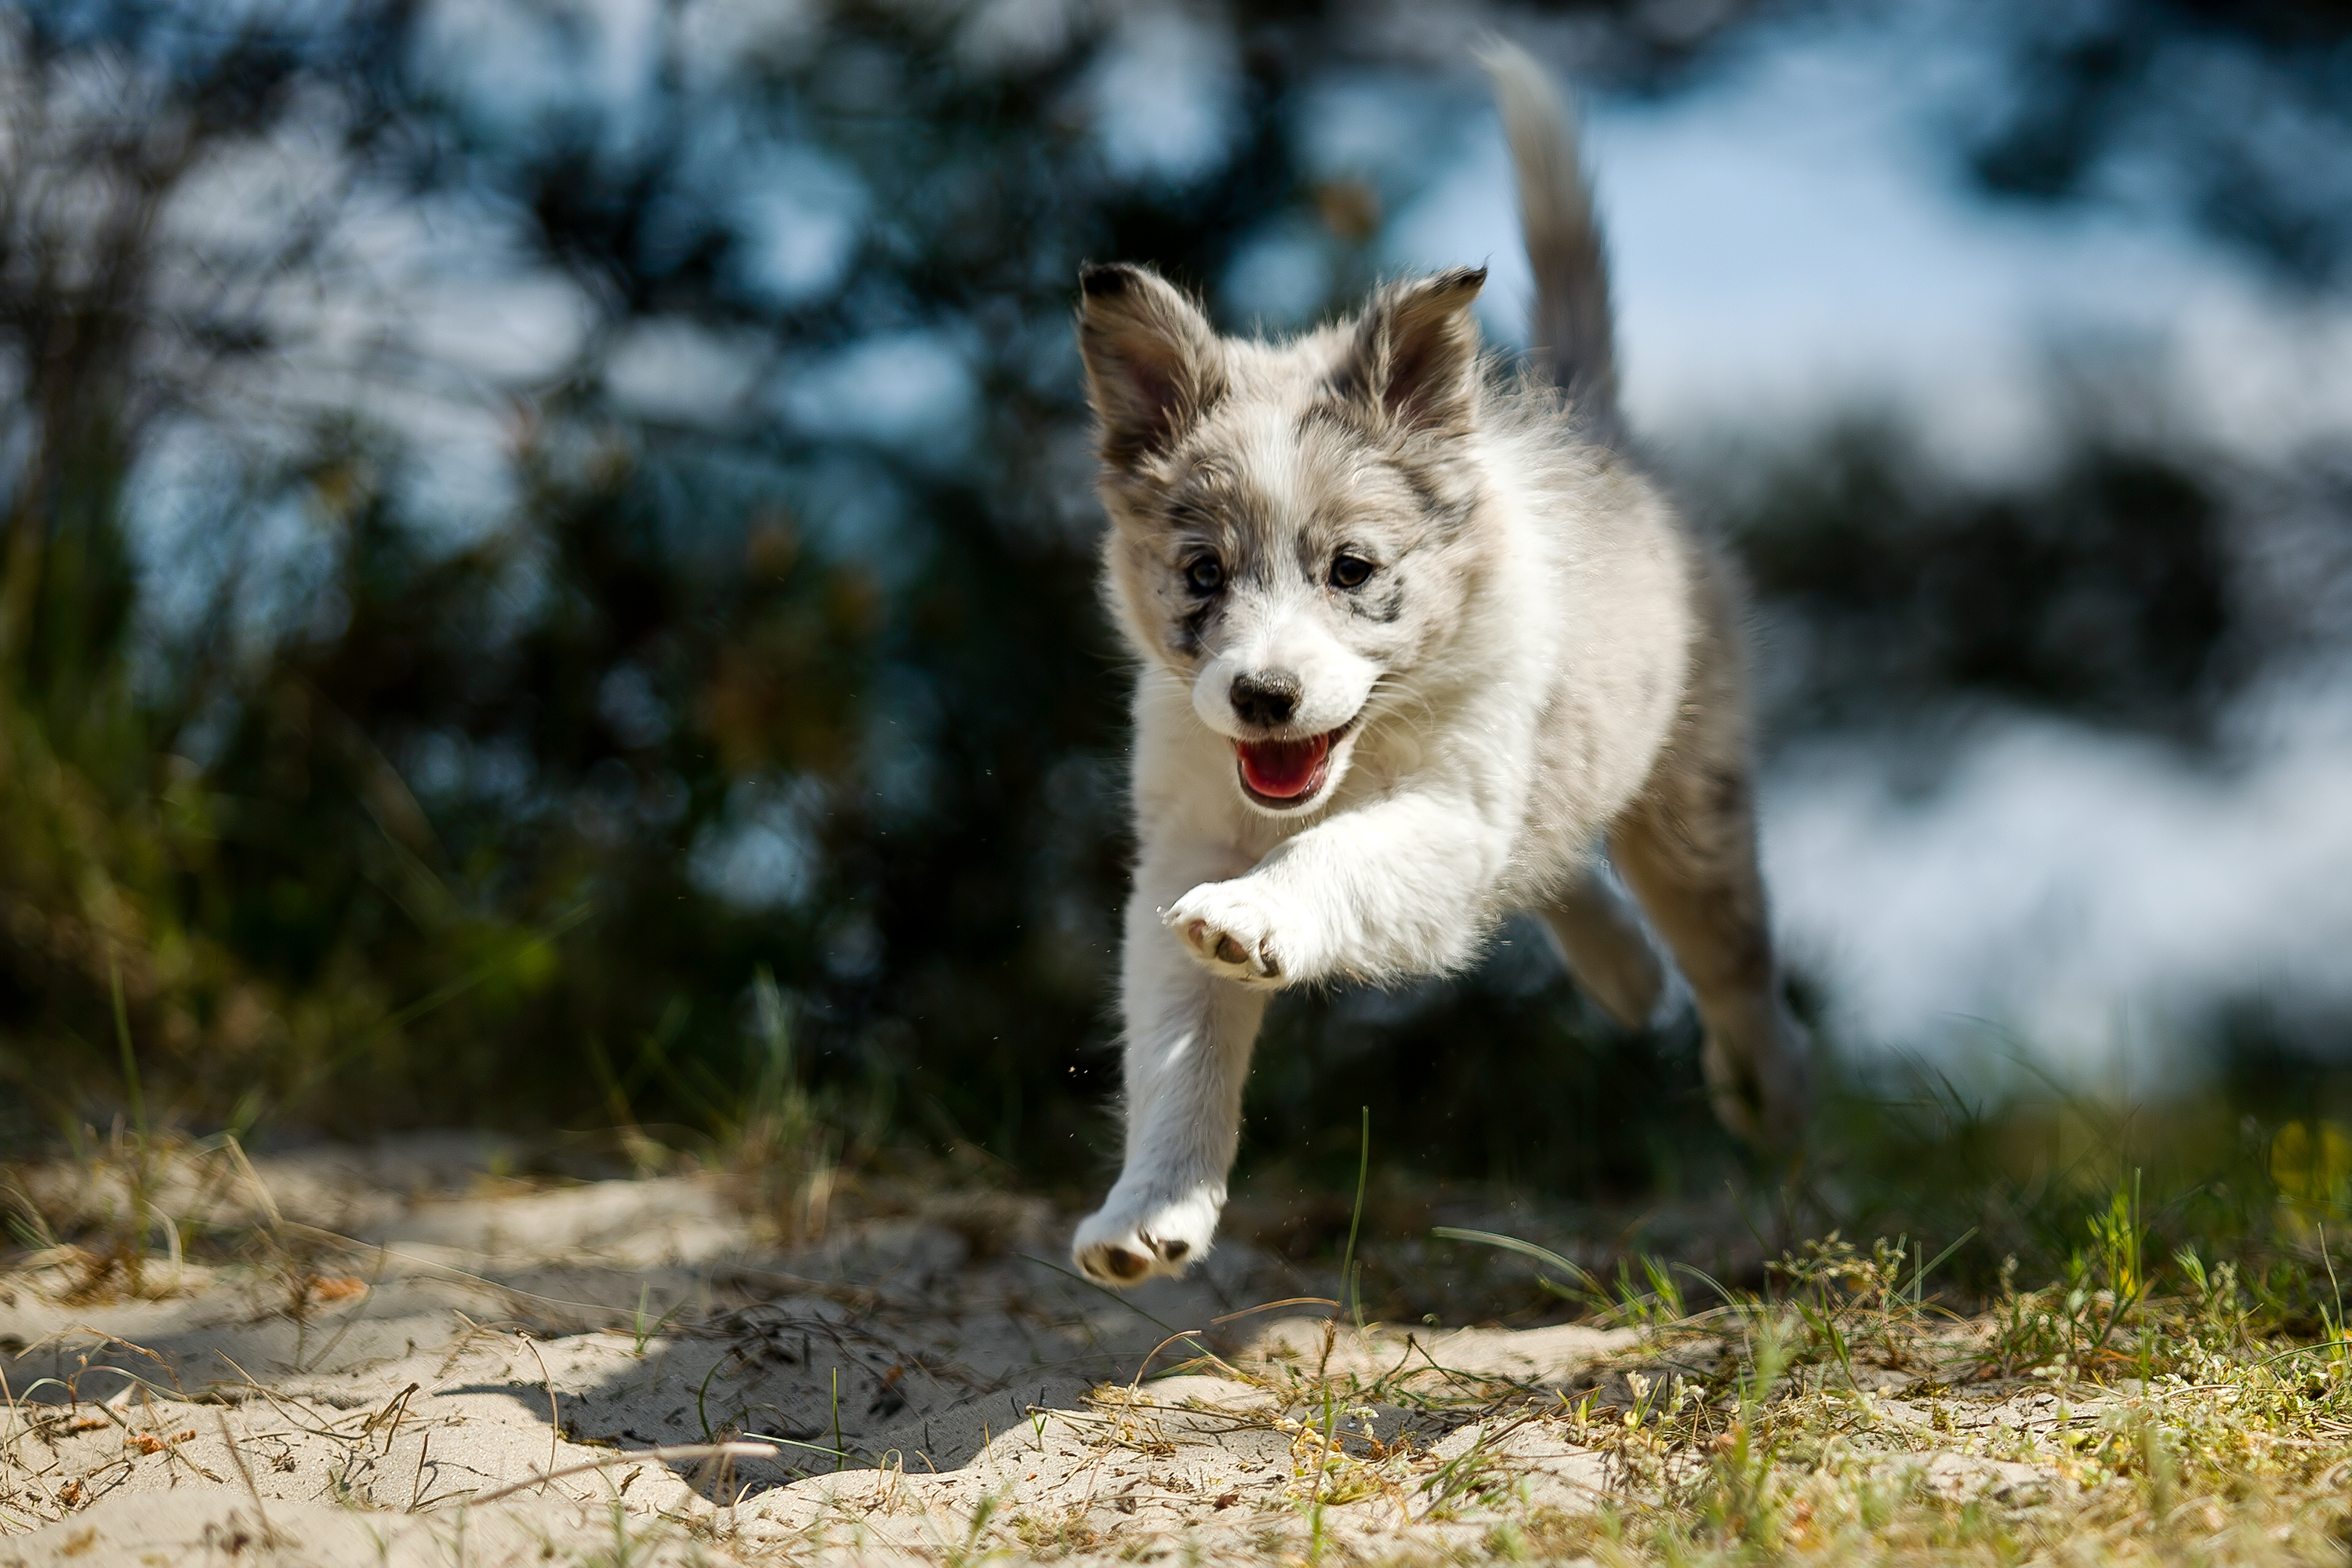 A bordercollie pup is running happily